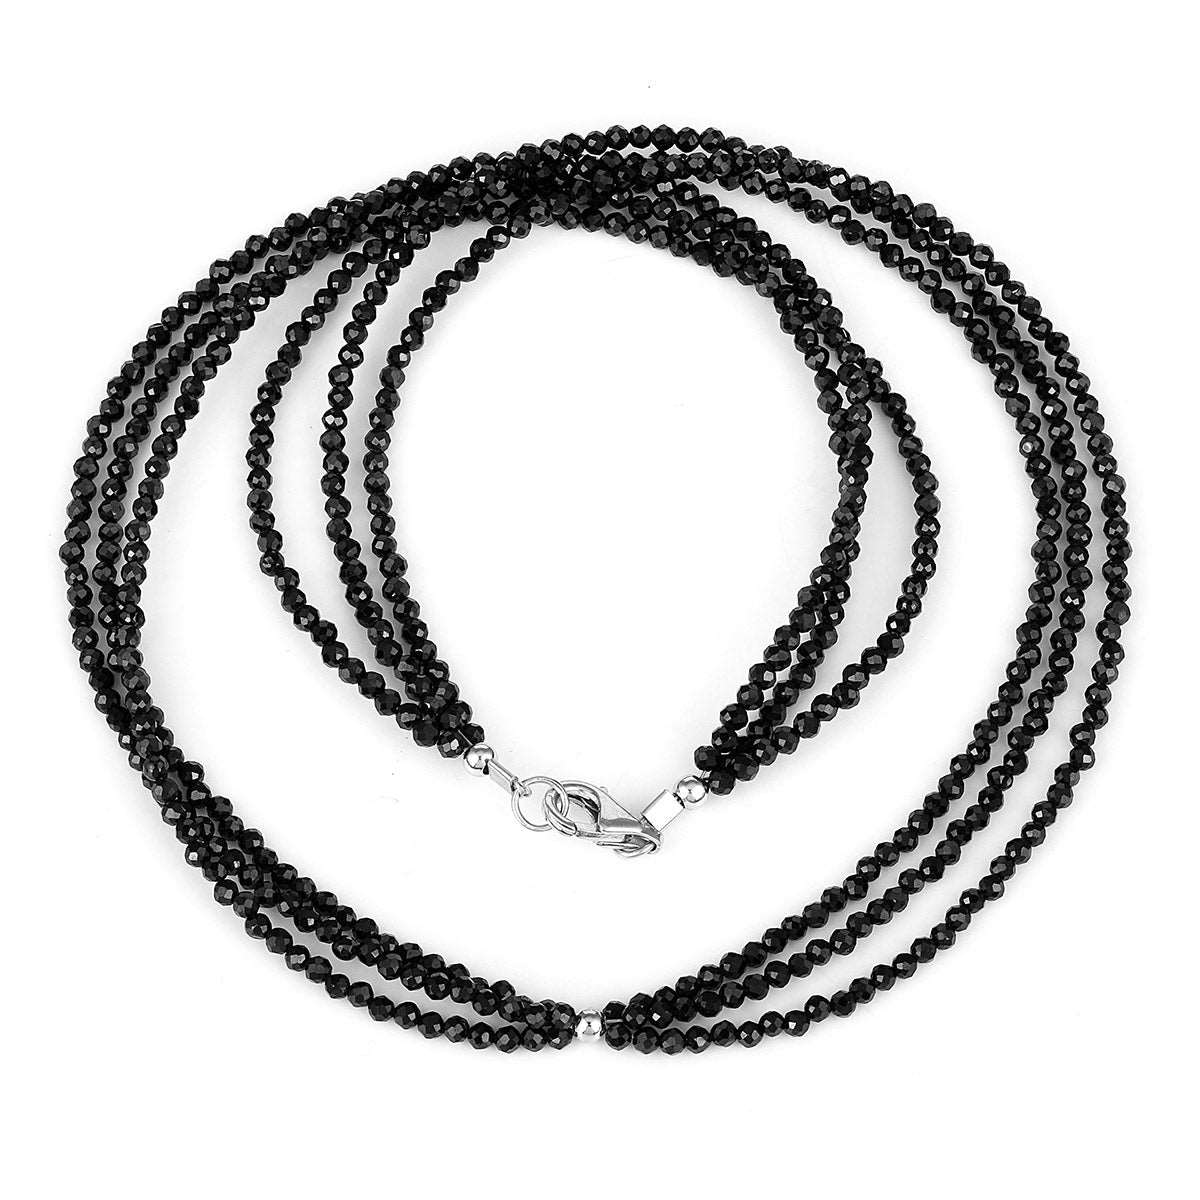 Black Spinel layered Choker Necklace